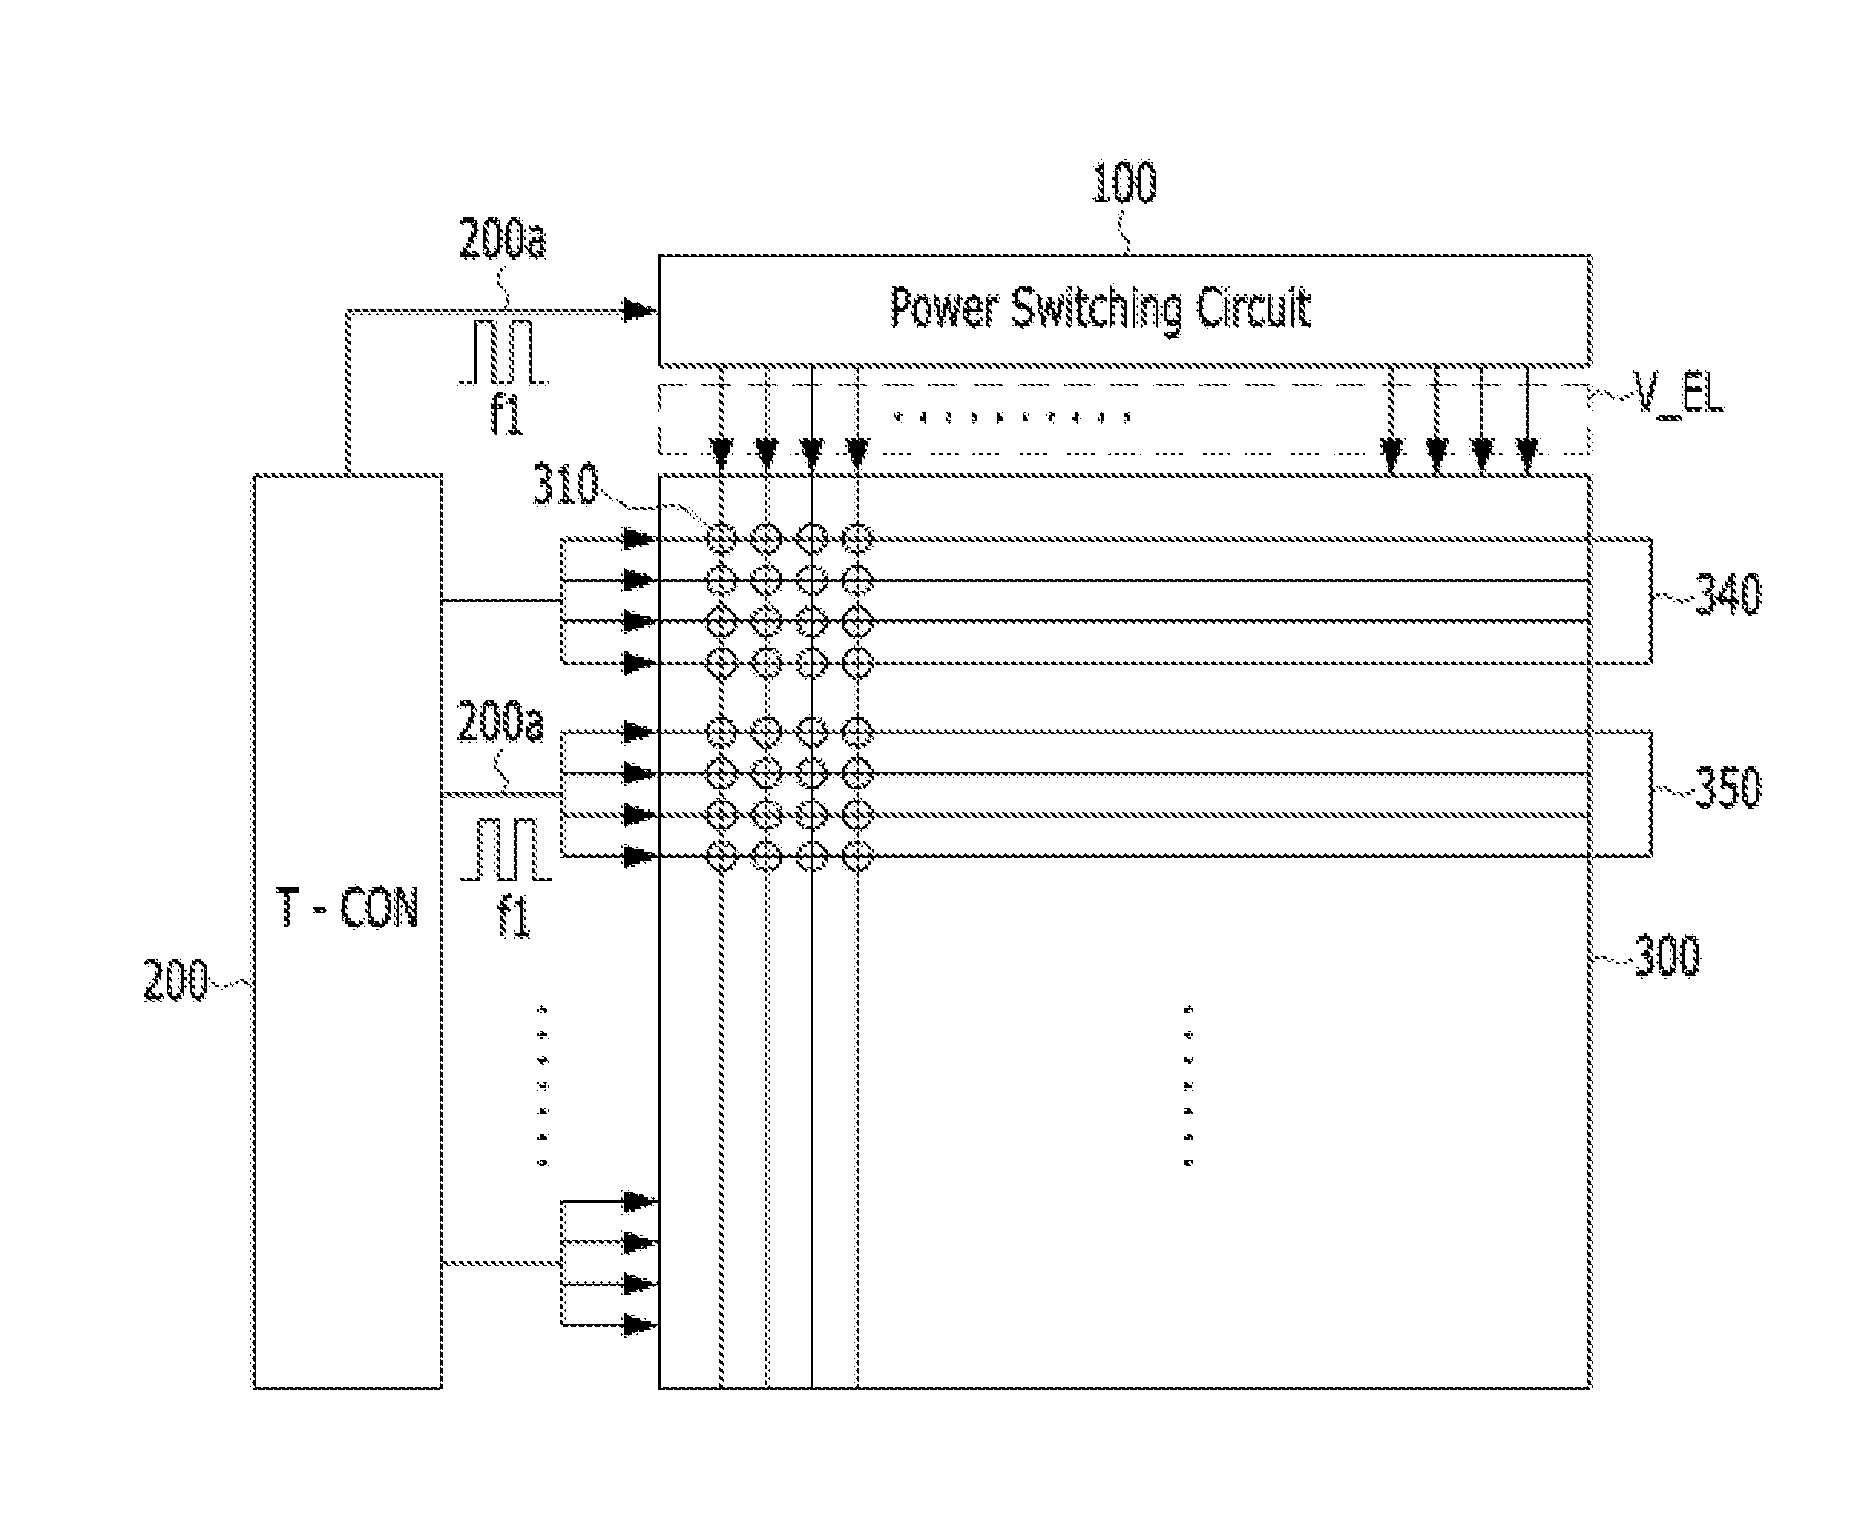 Power switching circuit and method for controlling same